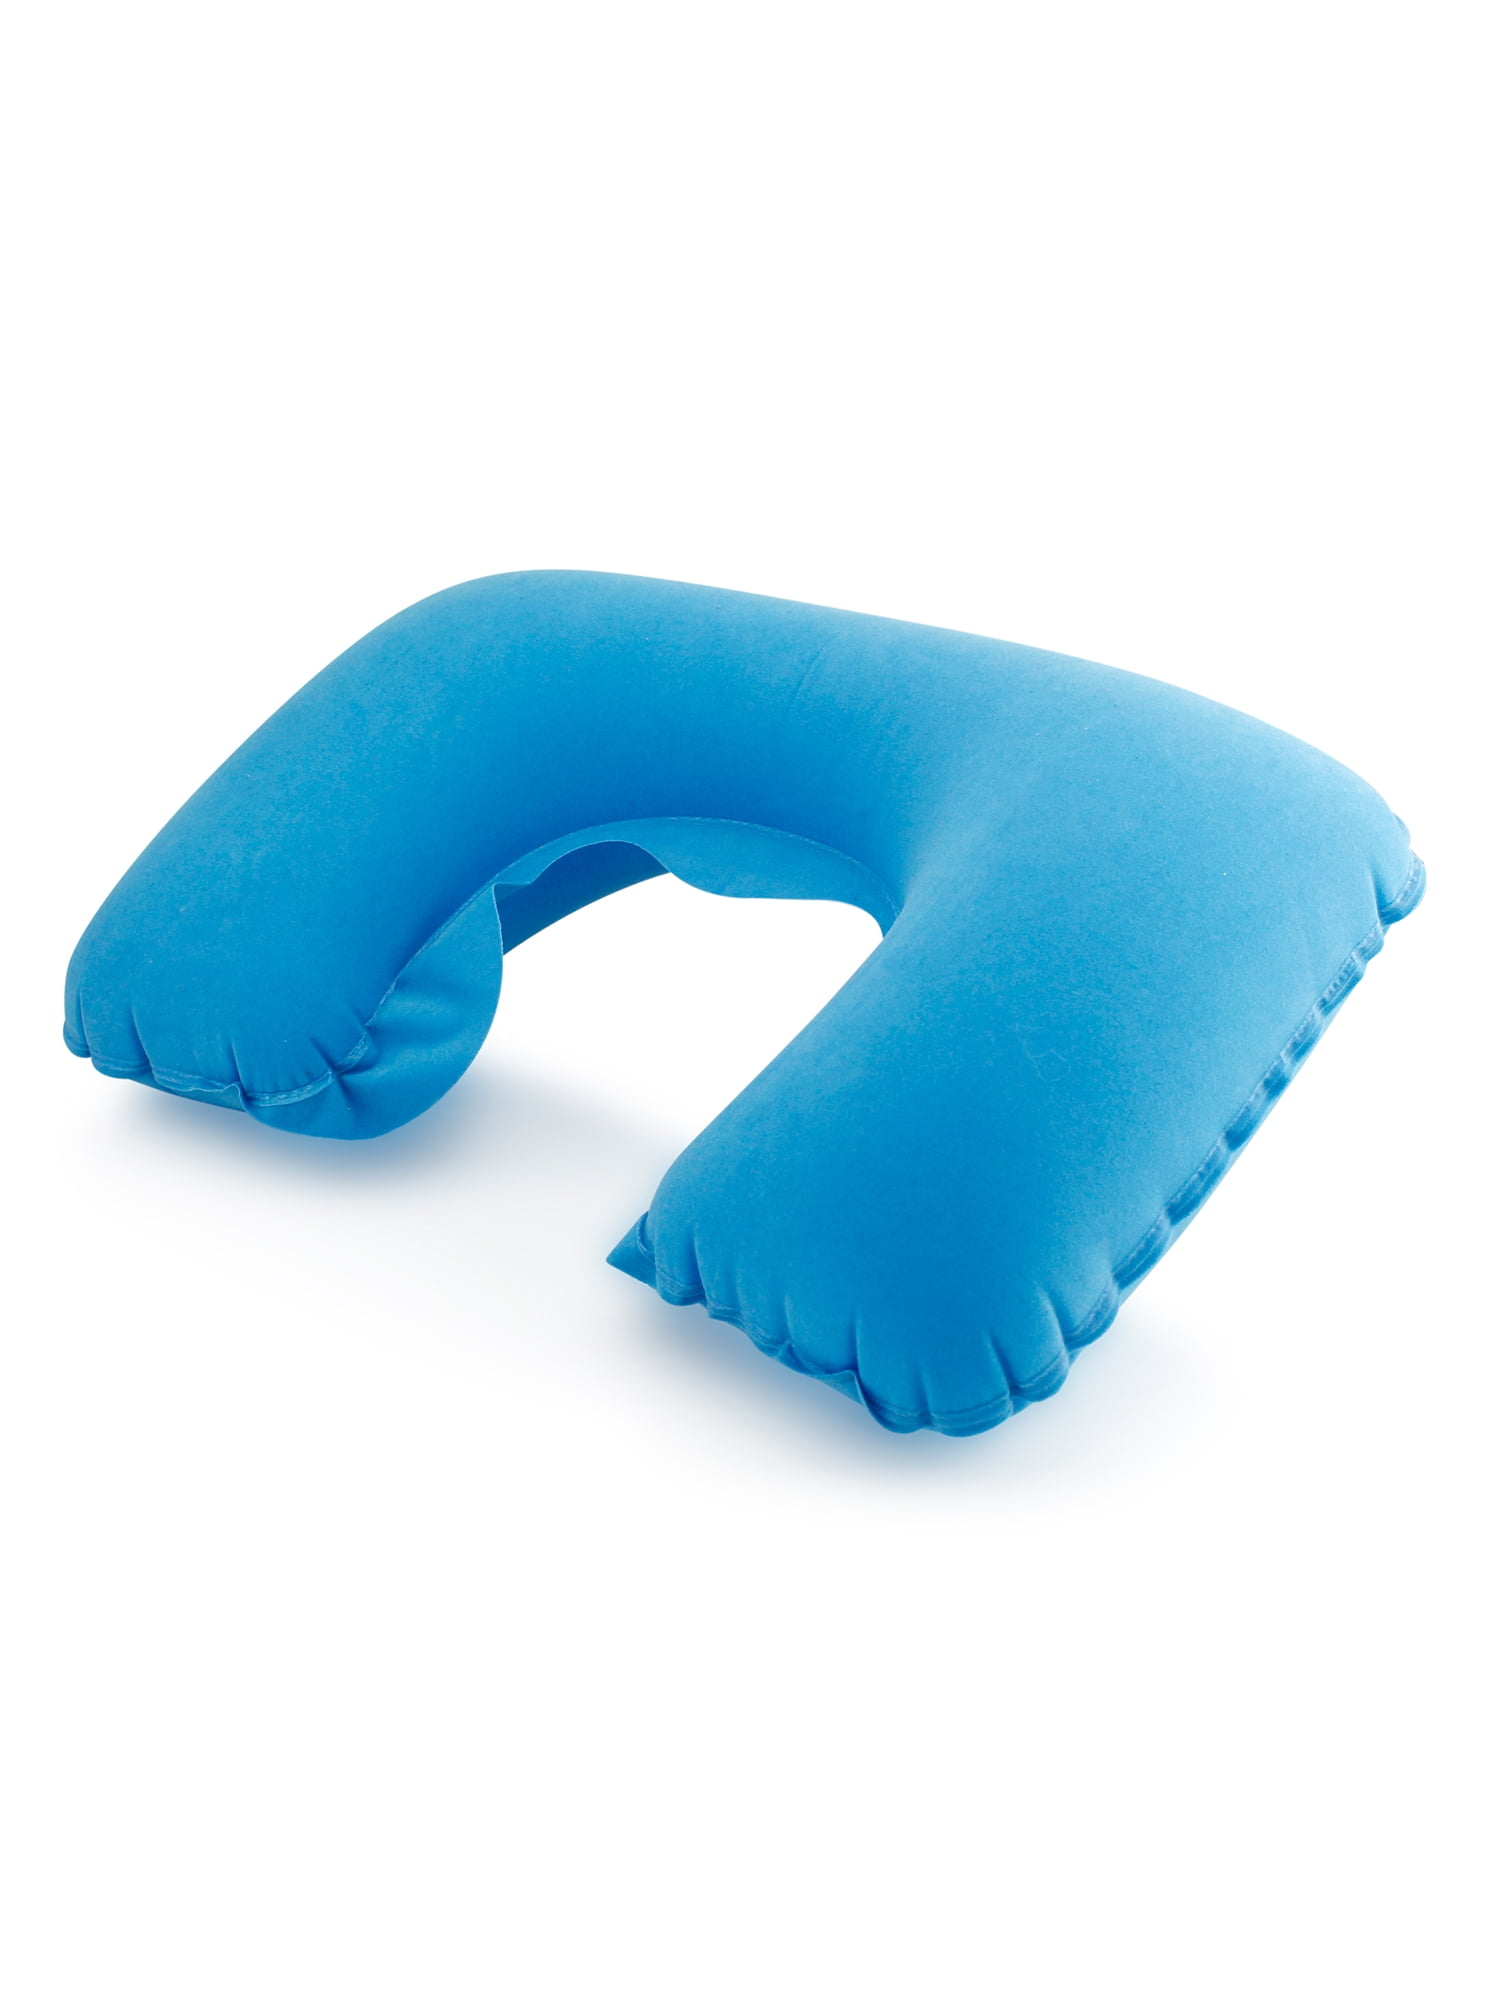 inflatable vinyl neck pillow measures 14 inches wide 